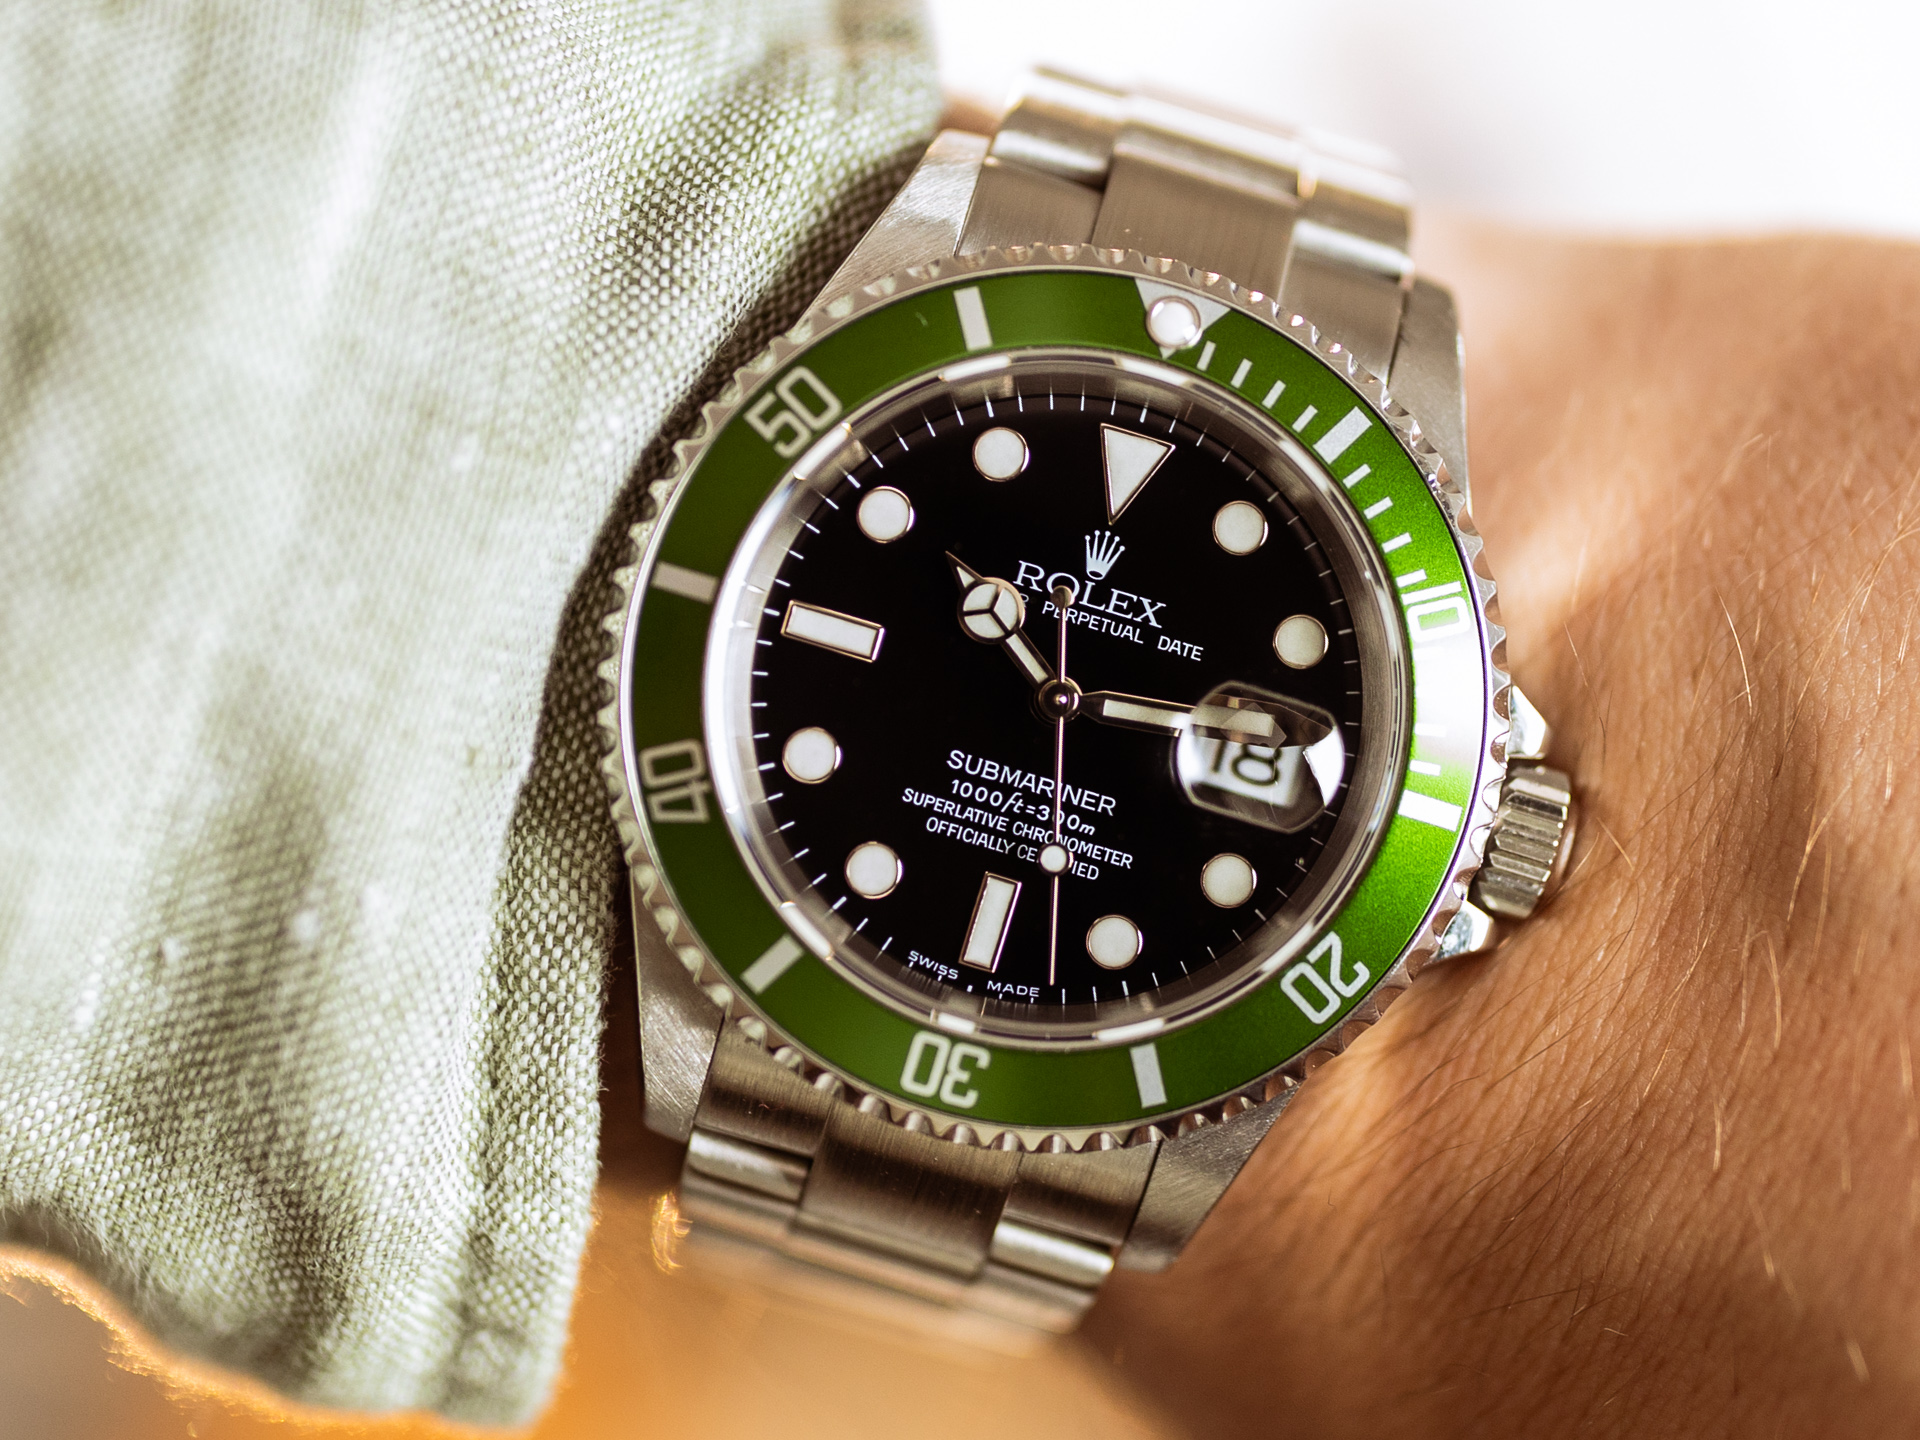 Rolex Submariner Date LV FLAT FOUR Ref-16610 Stainless Steel Box Papers  Bj-2004 Rolex Service 2019